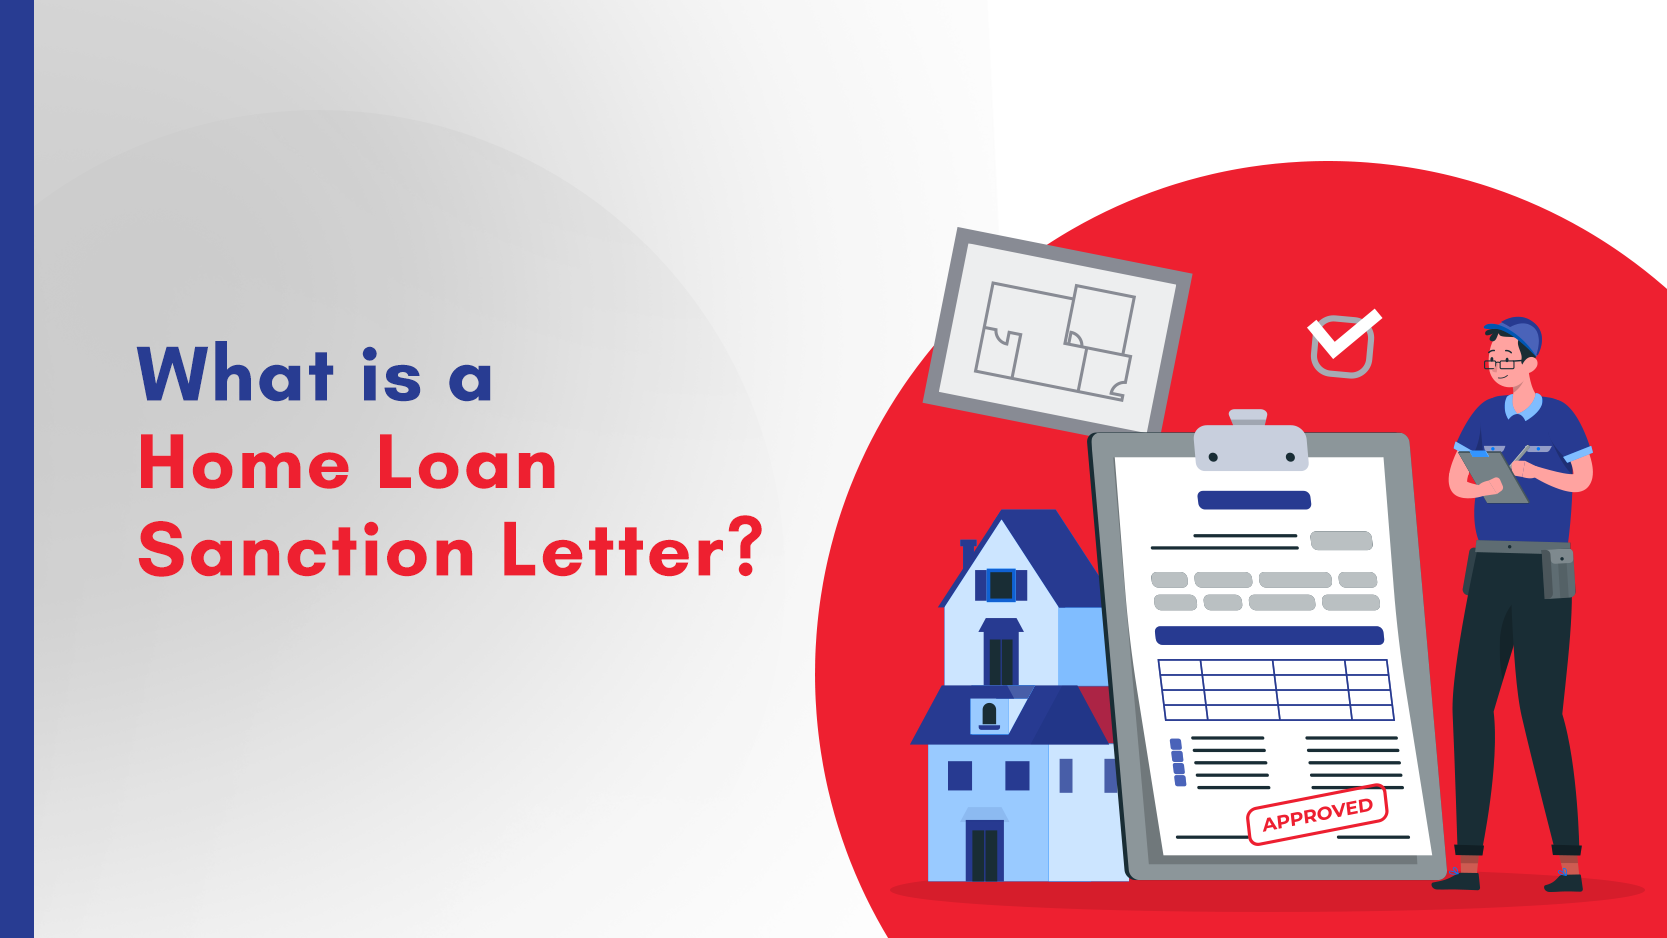 What is a Home Loan Sanction Letter?